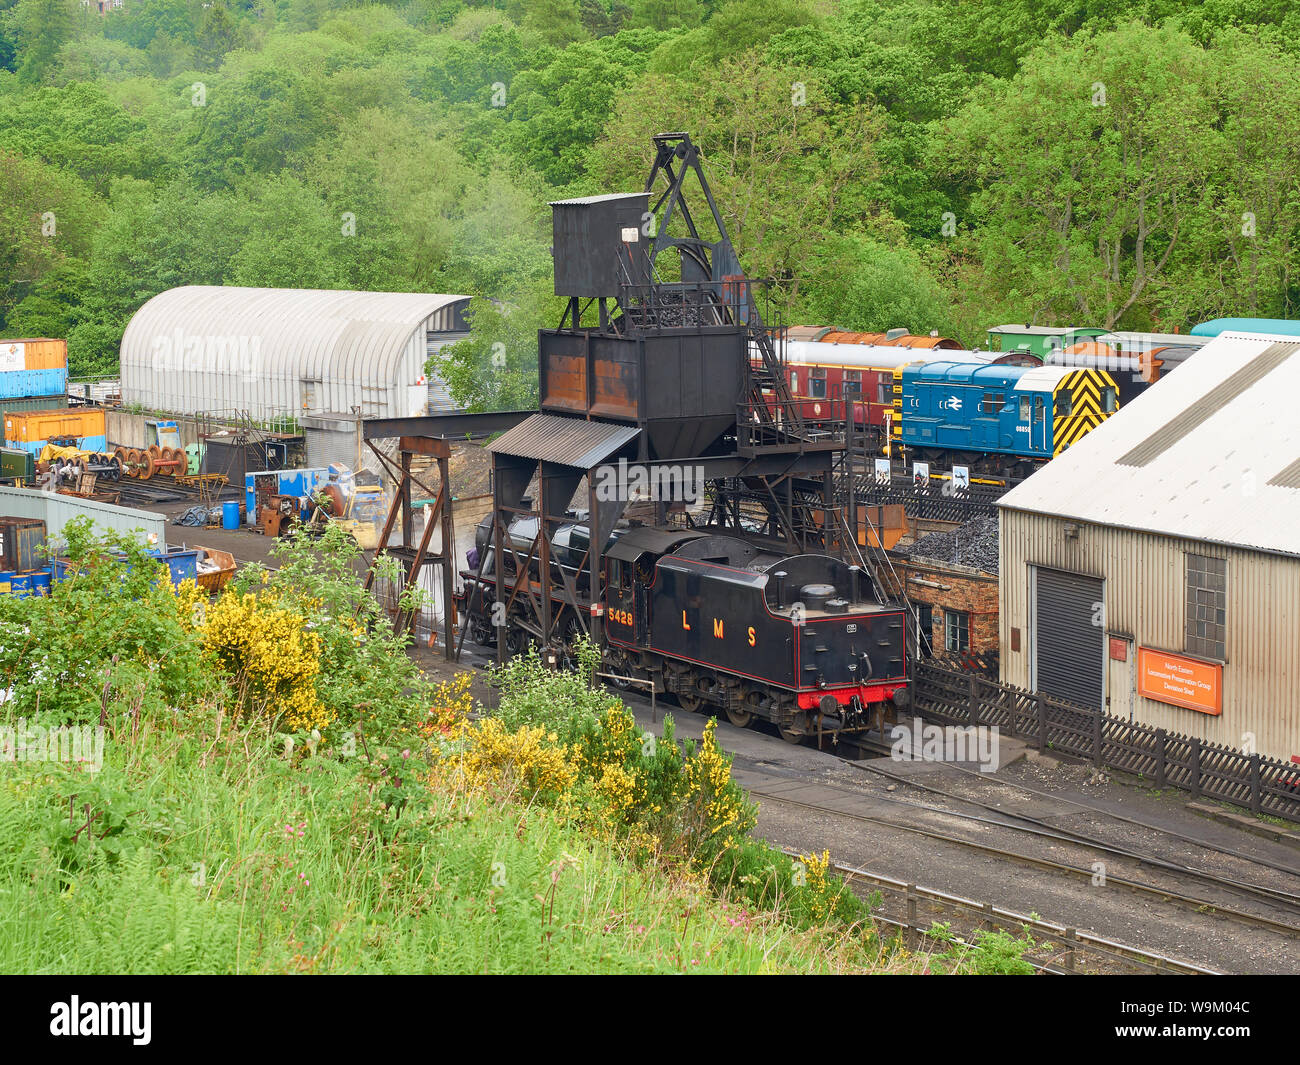 A steam engine locomotive filling with coal at Grosmont engine yard on the volunteer run heritage North York Moors Railway Stock Photo